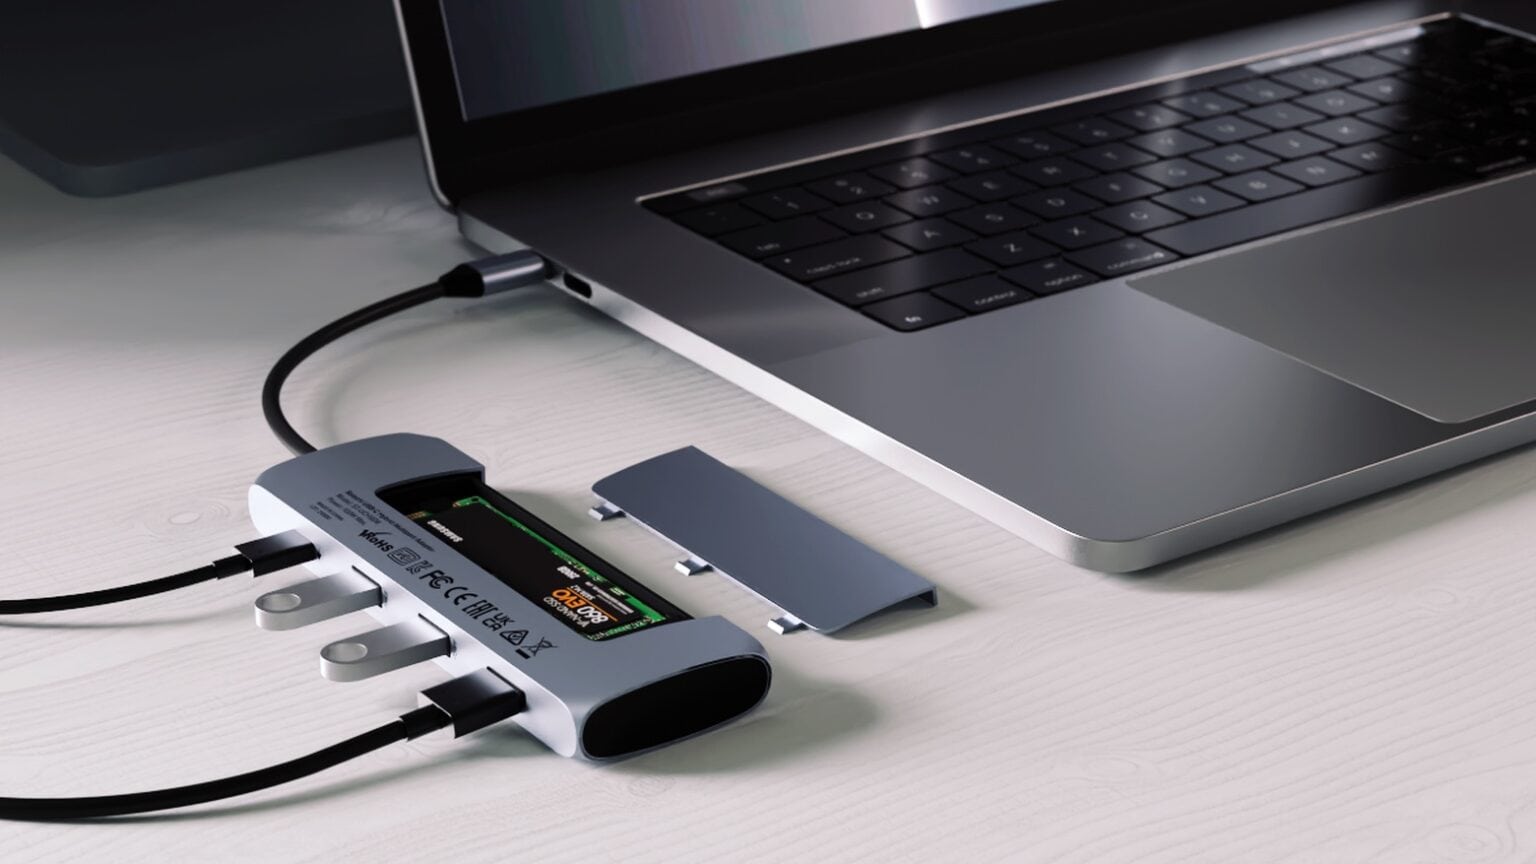 Satechi USB-C Hybrid Multiport Adapter cleverly combines SSD storage compartment and USB-C hub